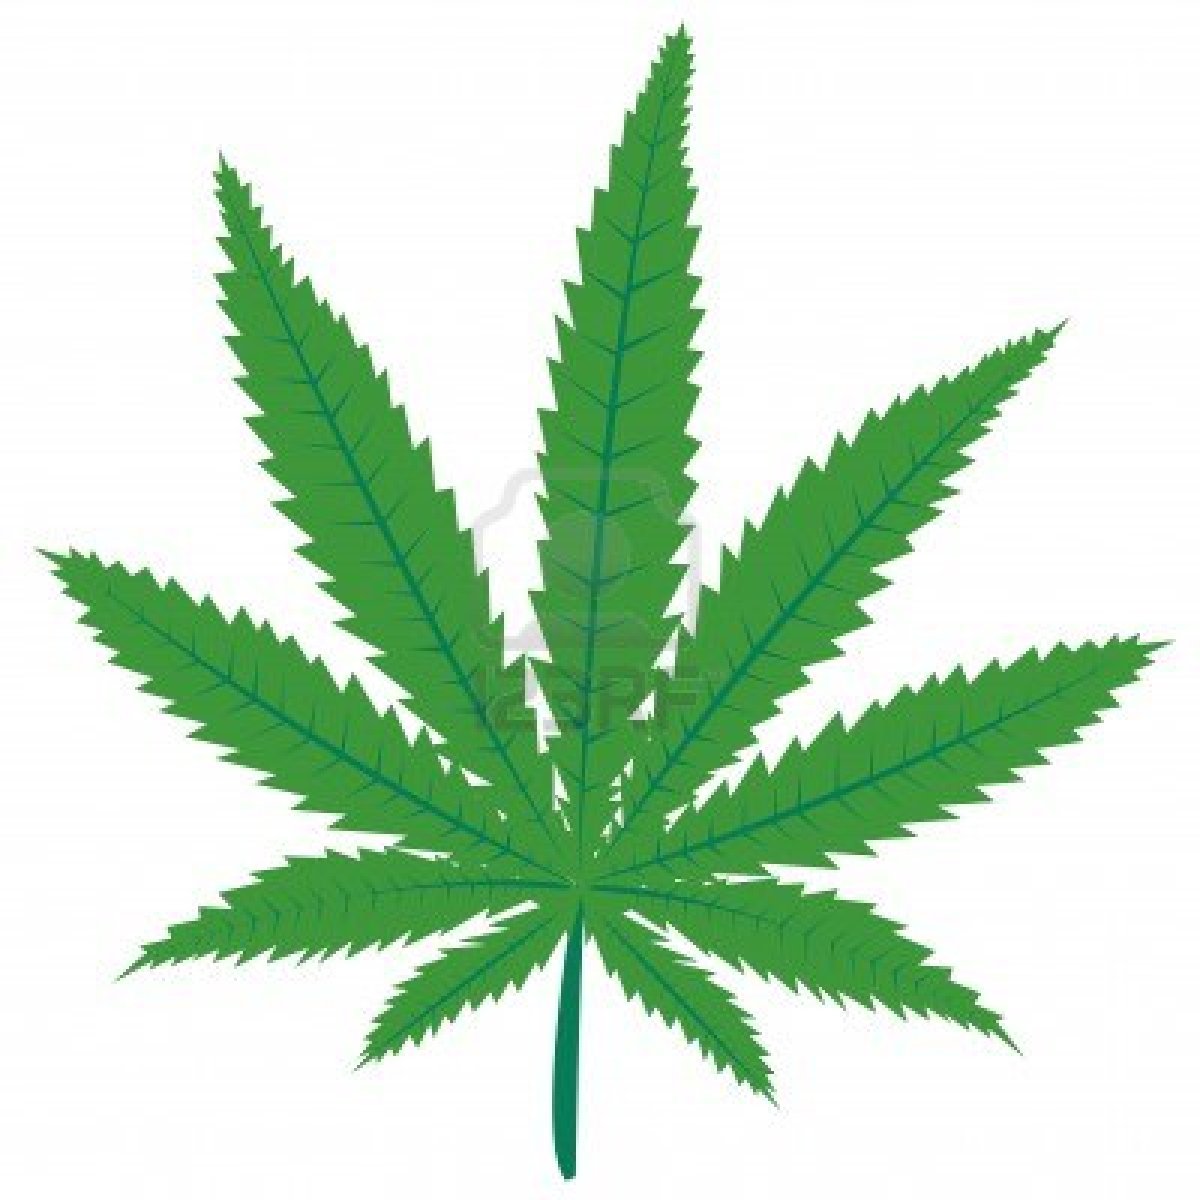 Weed Leaf   Clipart Panda   Free Clipart Images